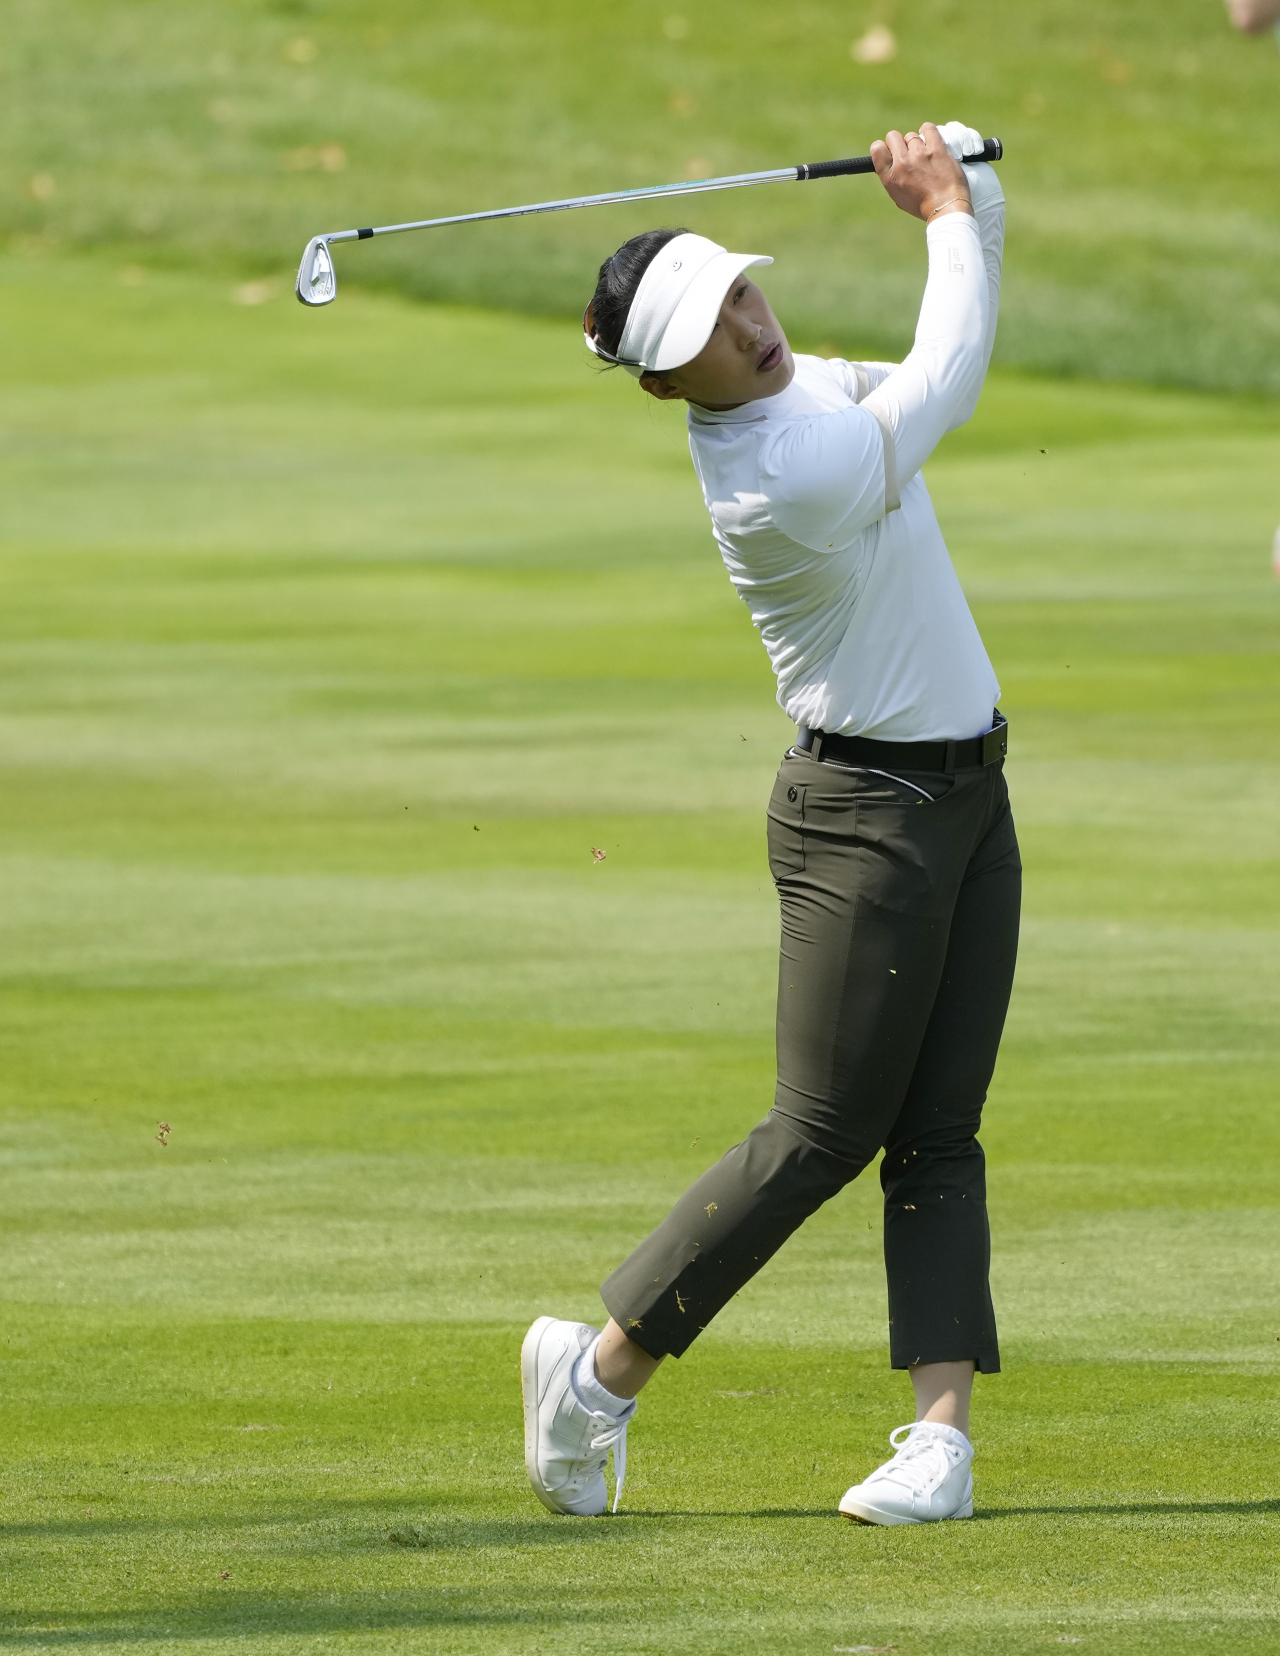 Yang Hee-young hits her approach shot onto the third green during the final round of the Meijer LPGA Classic golf tournament at Blythefield Country Club in Belmont, Mich, June 18. (AP-Yonhap)